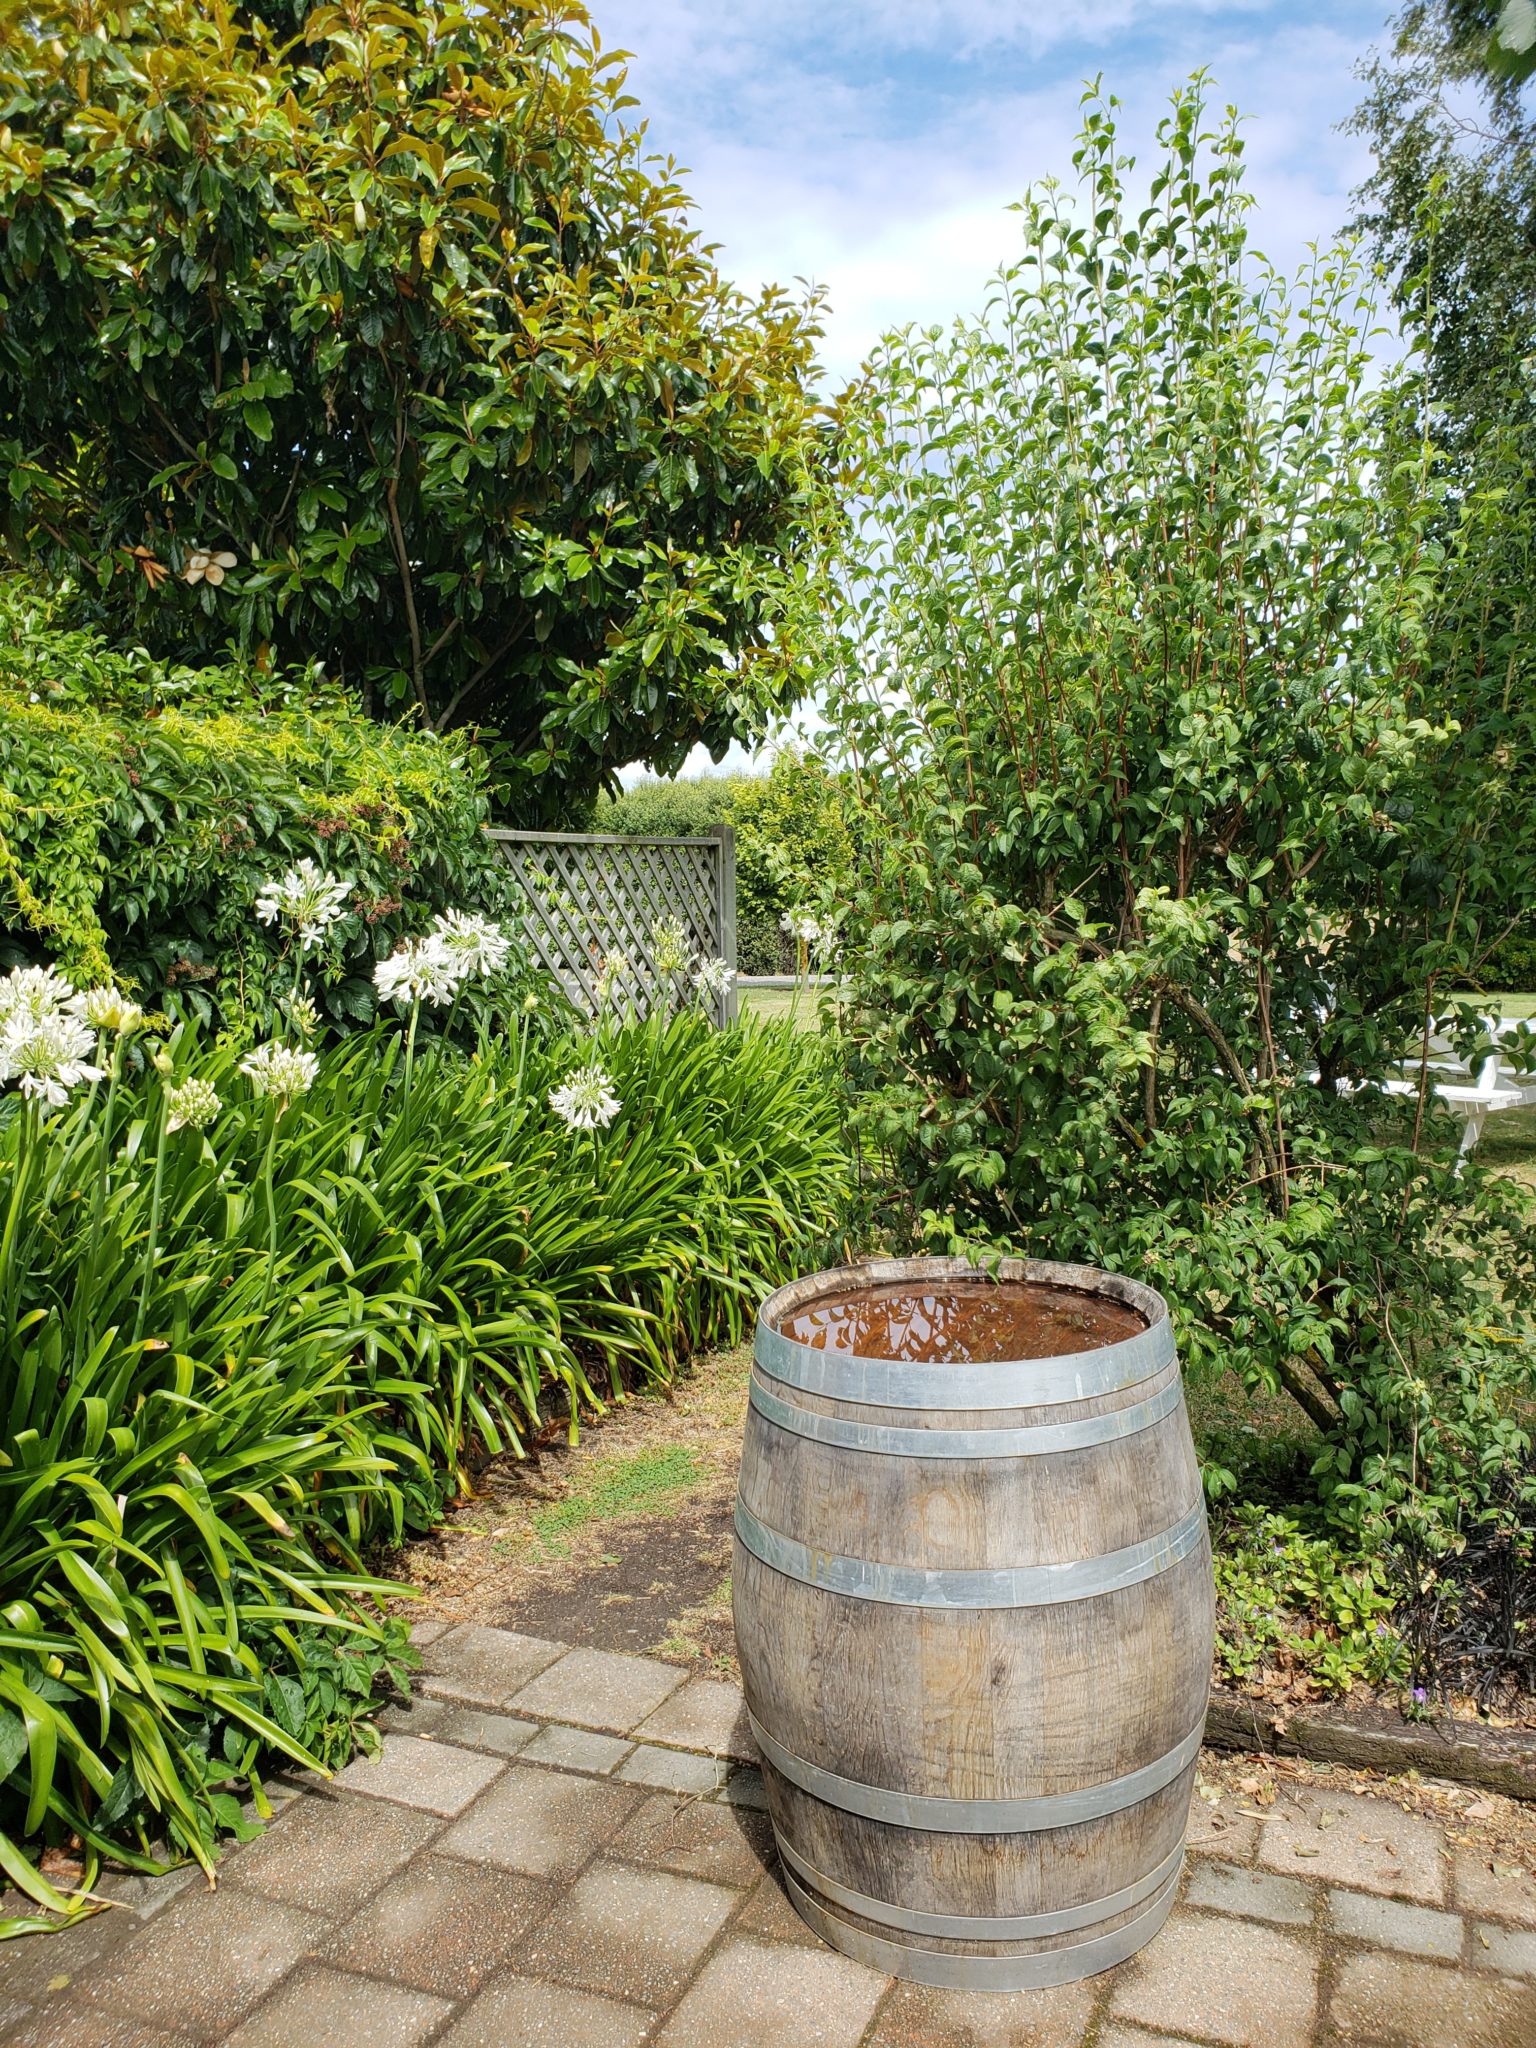 a barrel with water in it surrounded by plants and trees